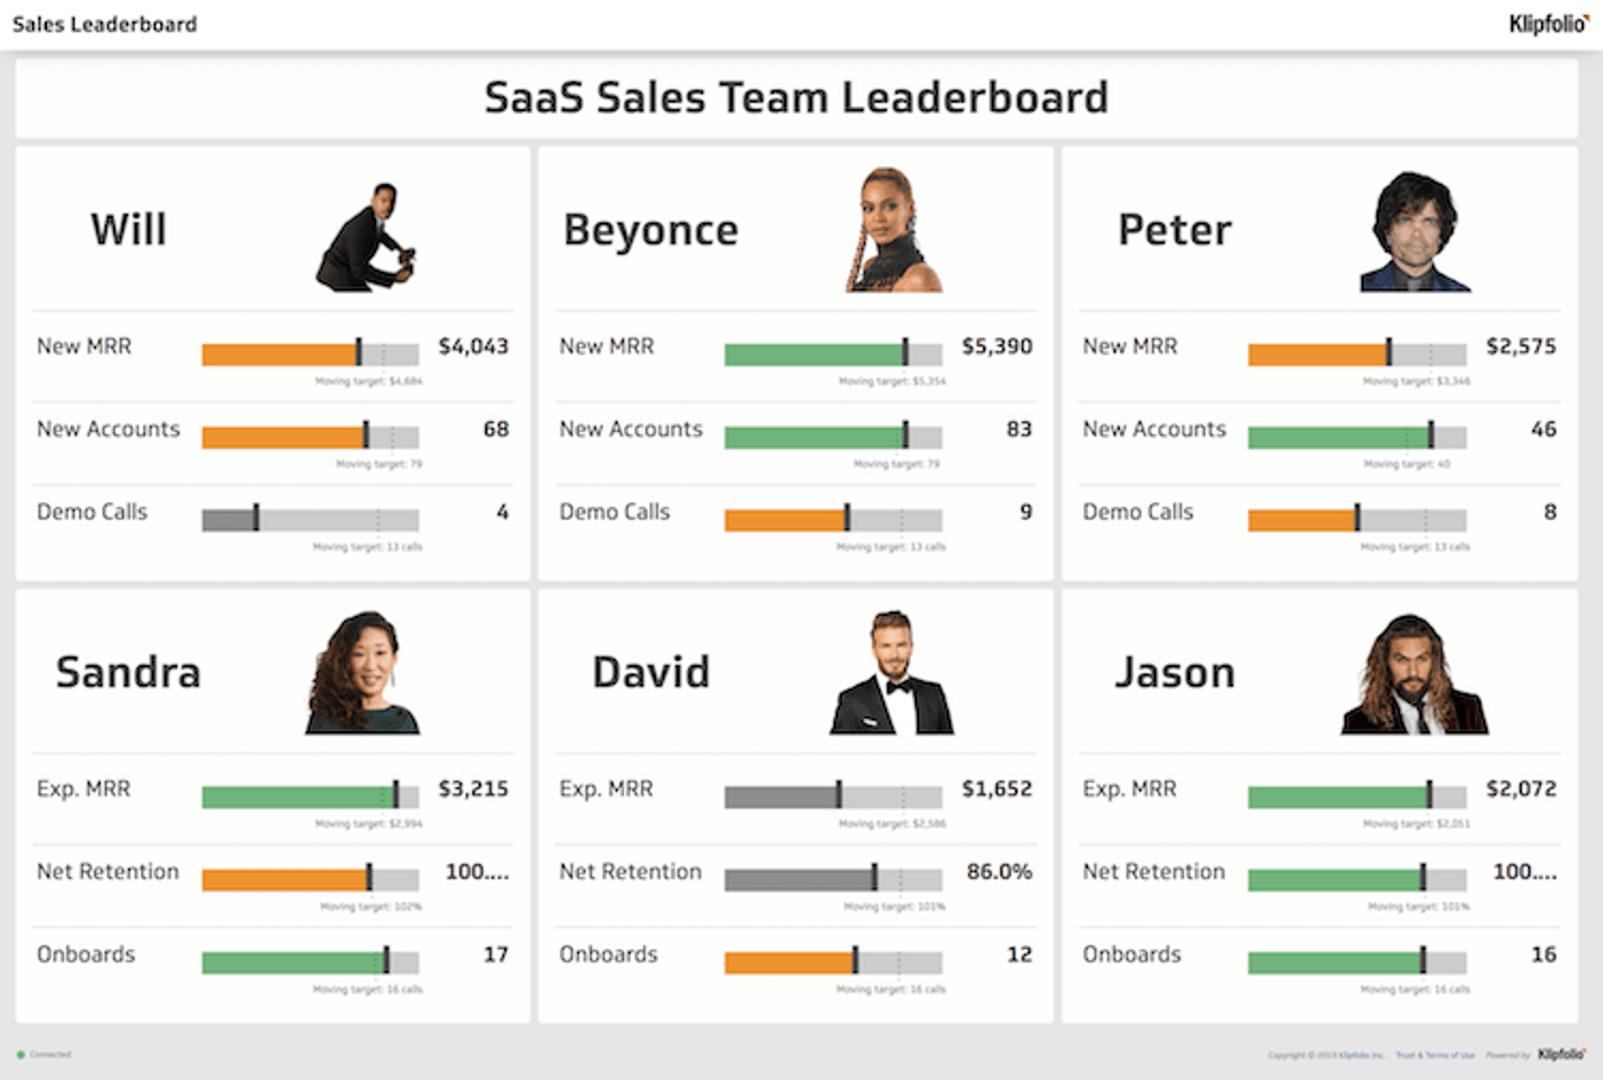 Related Dashboard Examples - Sales Leaderboard Dashboard